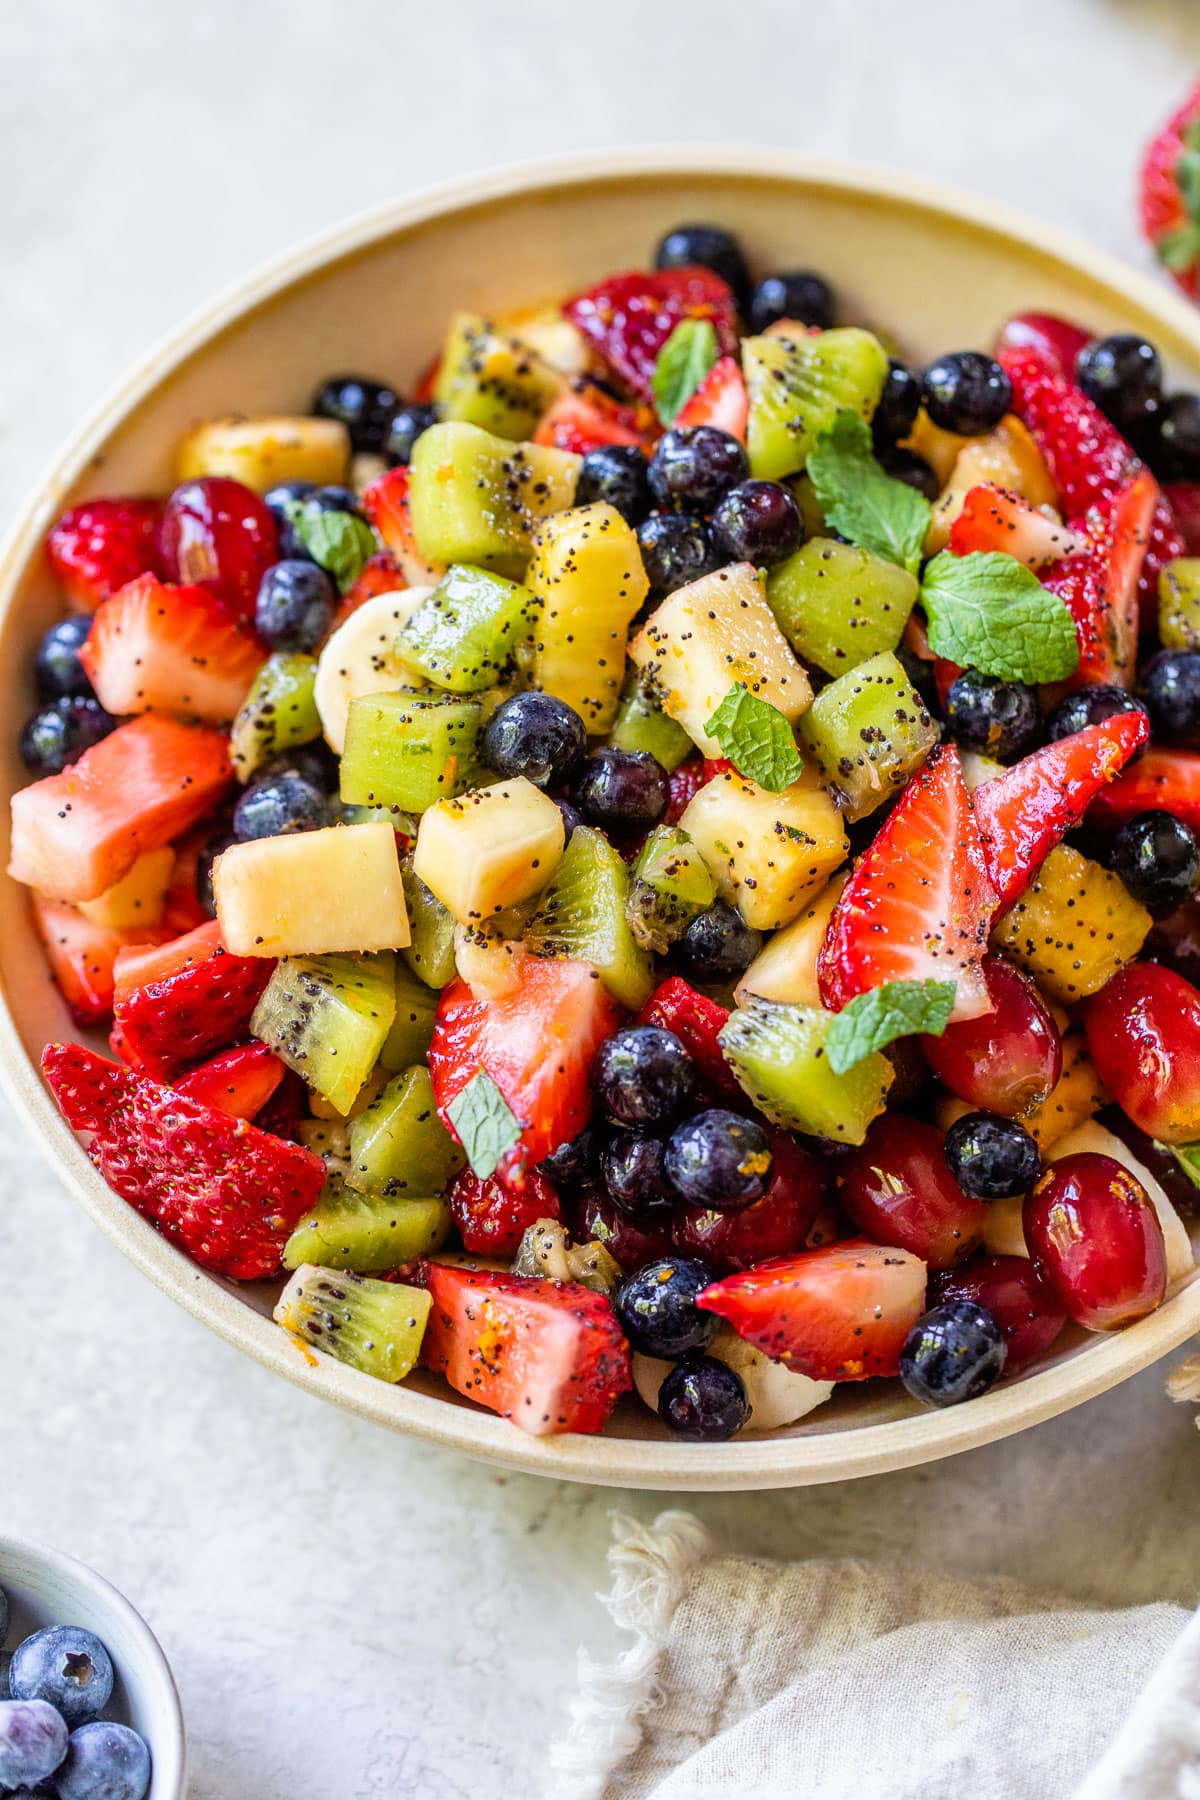 mixed fruit salad with kiwi, strawberries, and blueberries